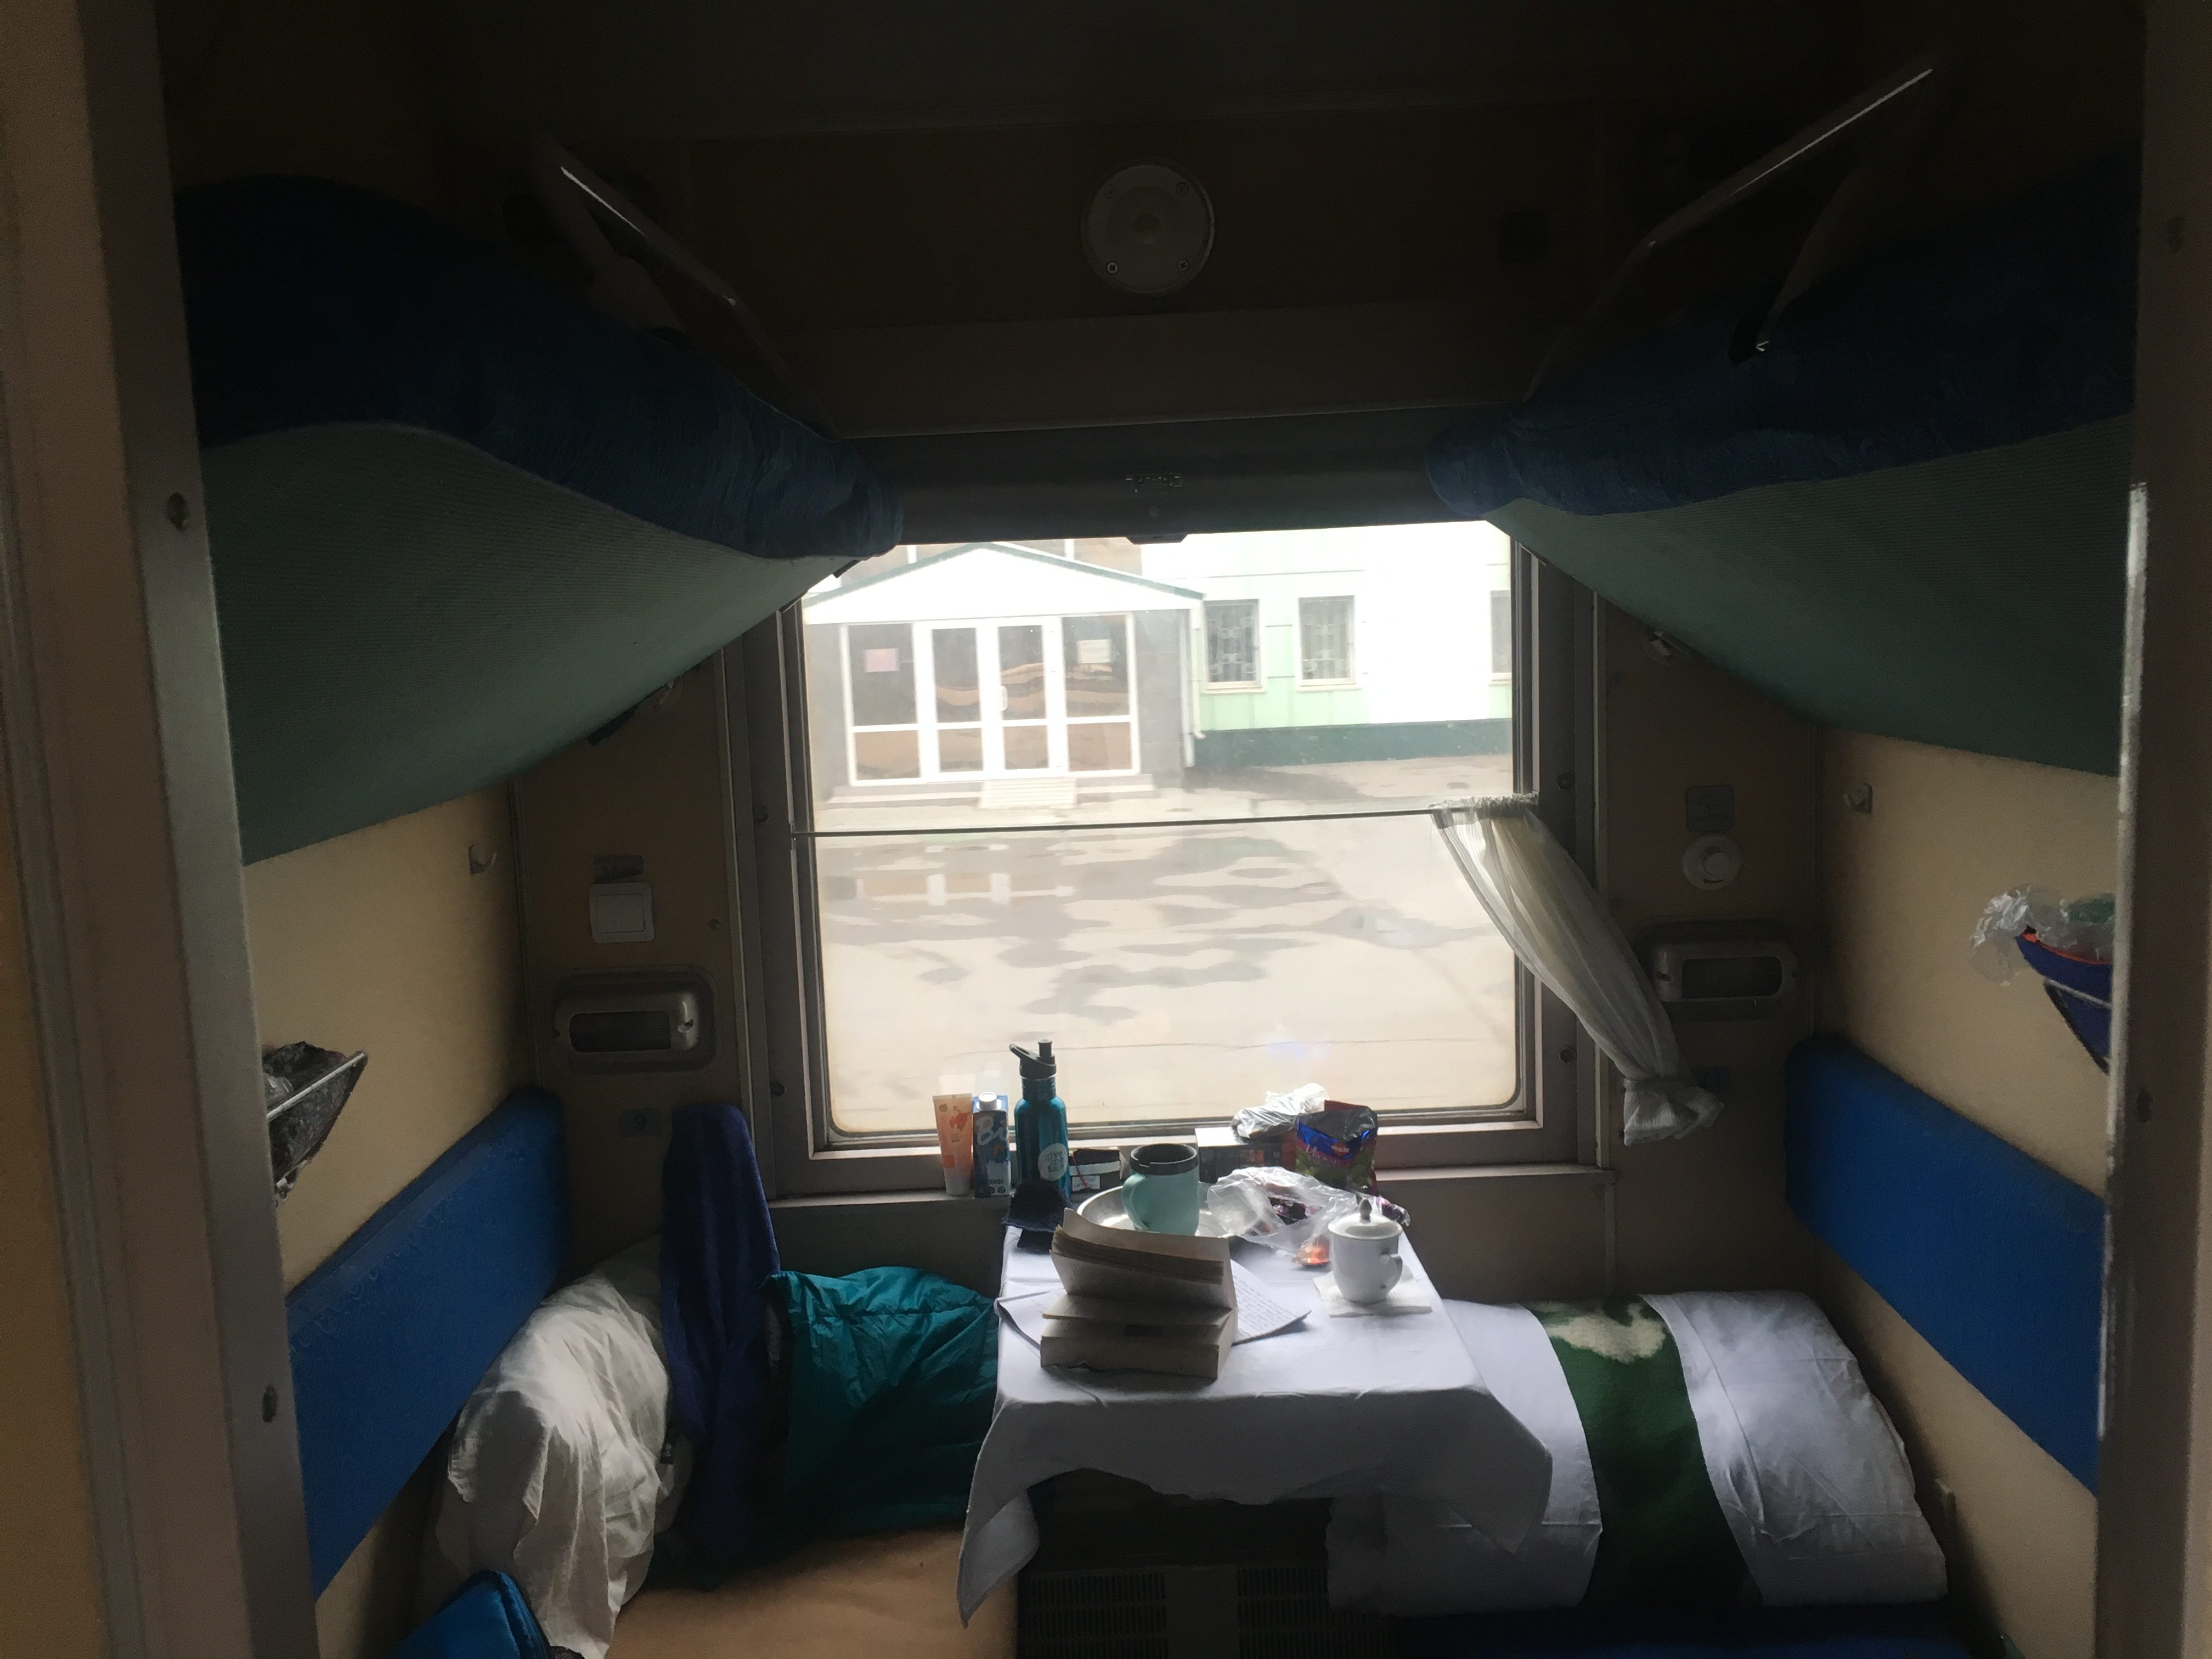 Still at Omsk, my nest on the left. Anton's neat bedding roll on the right